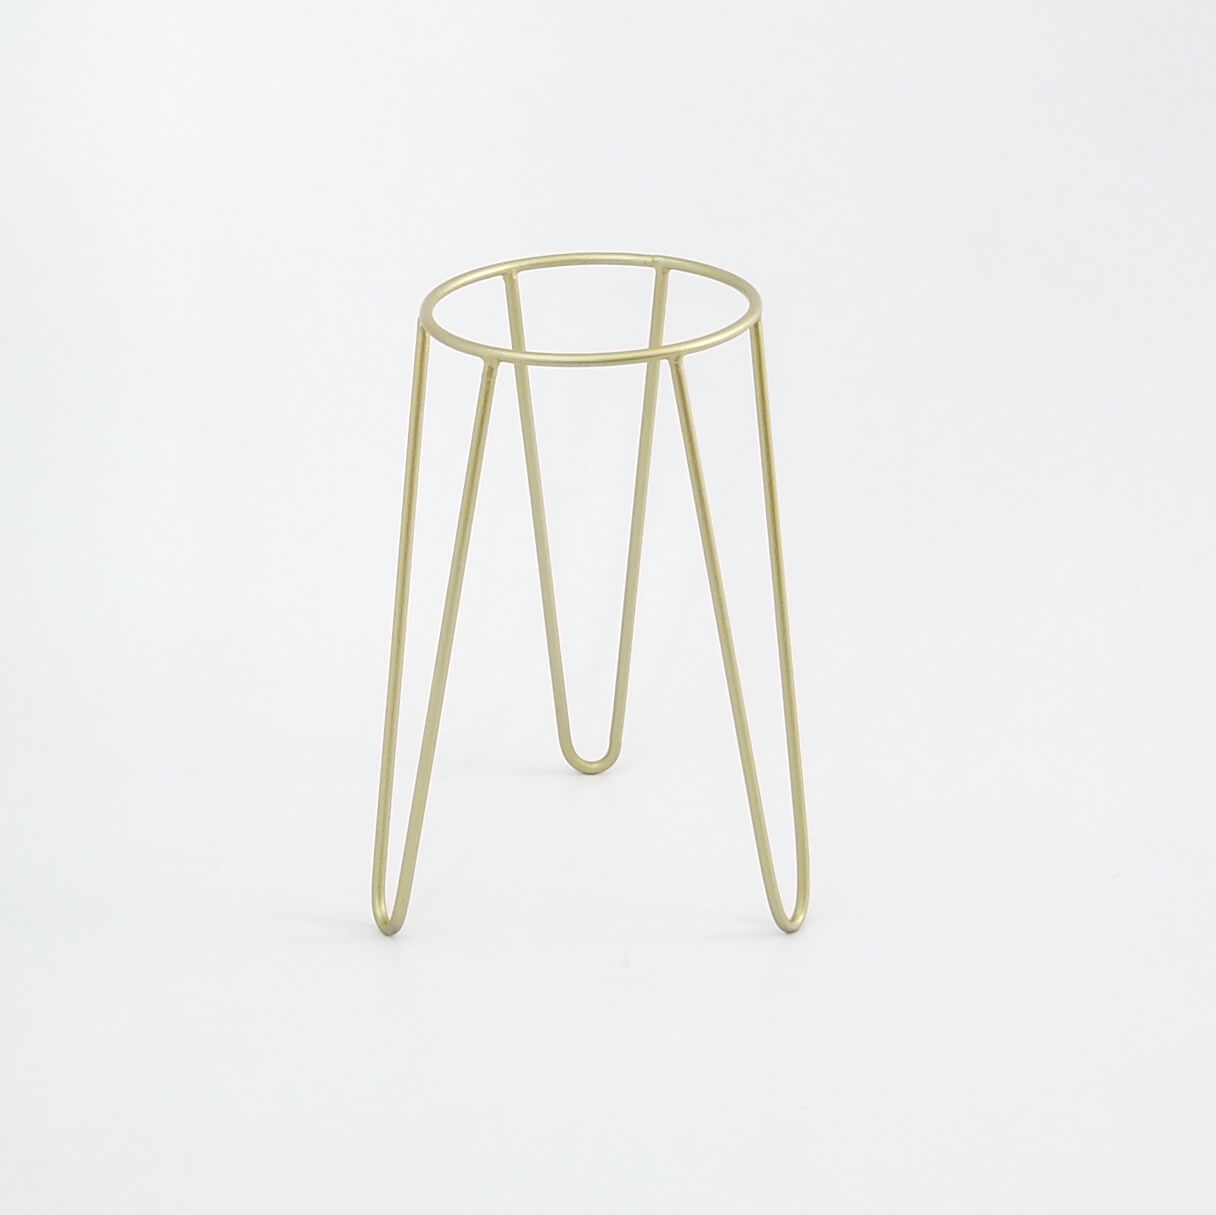 Plant Stands - Hairpin